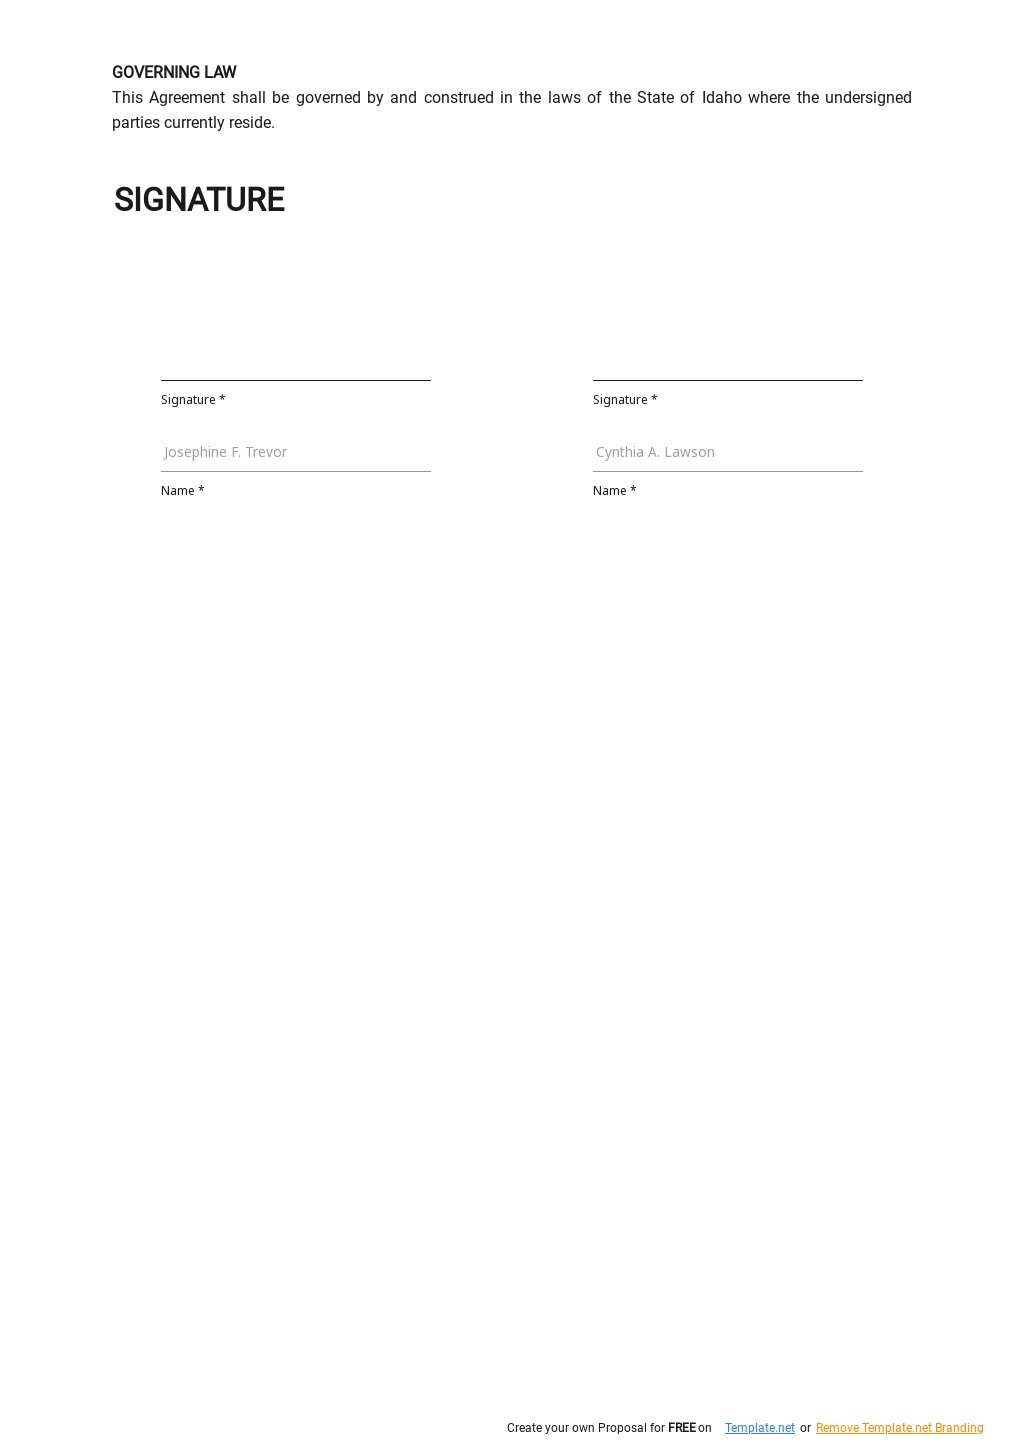 MSA (Master Service Agreement) Template in Google Docs, Word, Apple